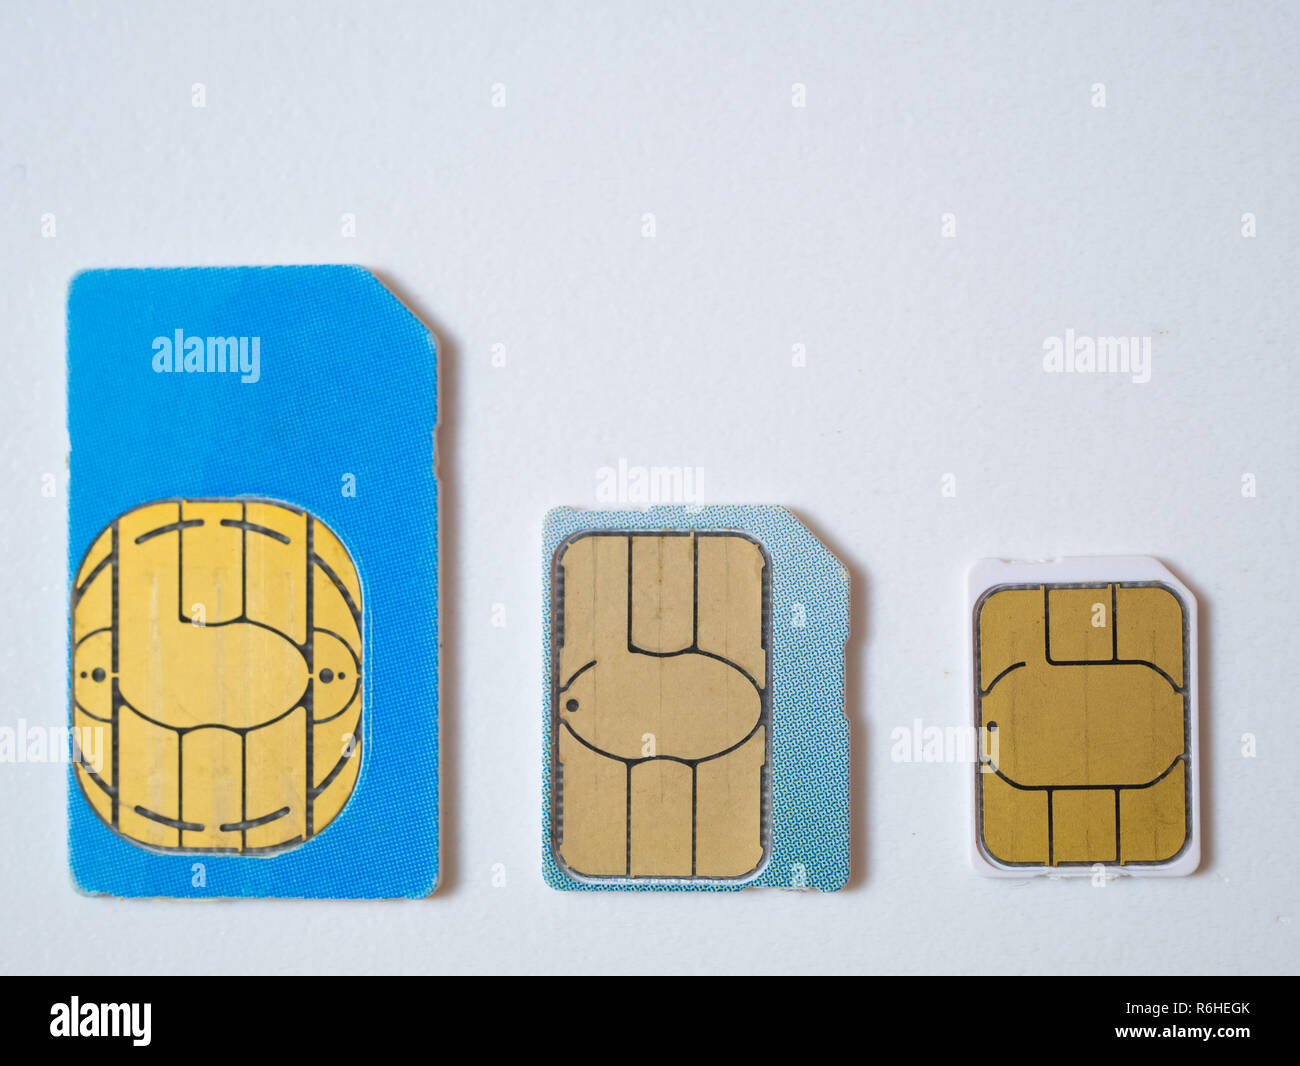 three sim cards micro, nano 4g lte 5g ready on white background. flat lay shot from the top Stock Photo